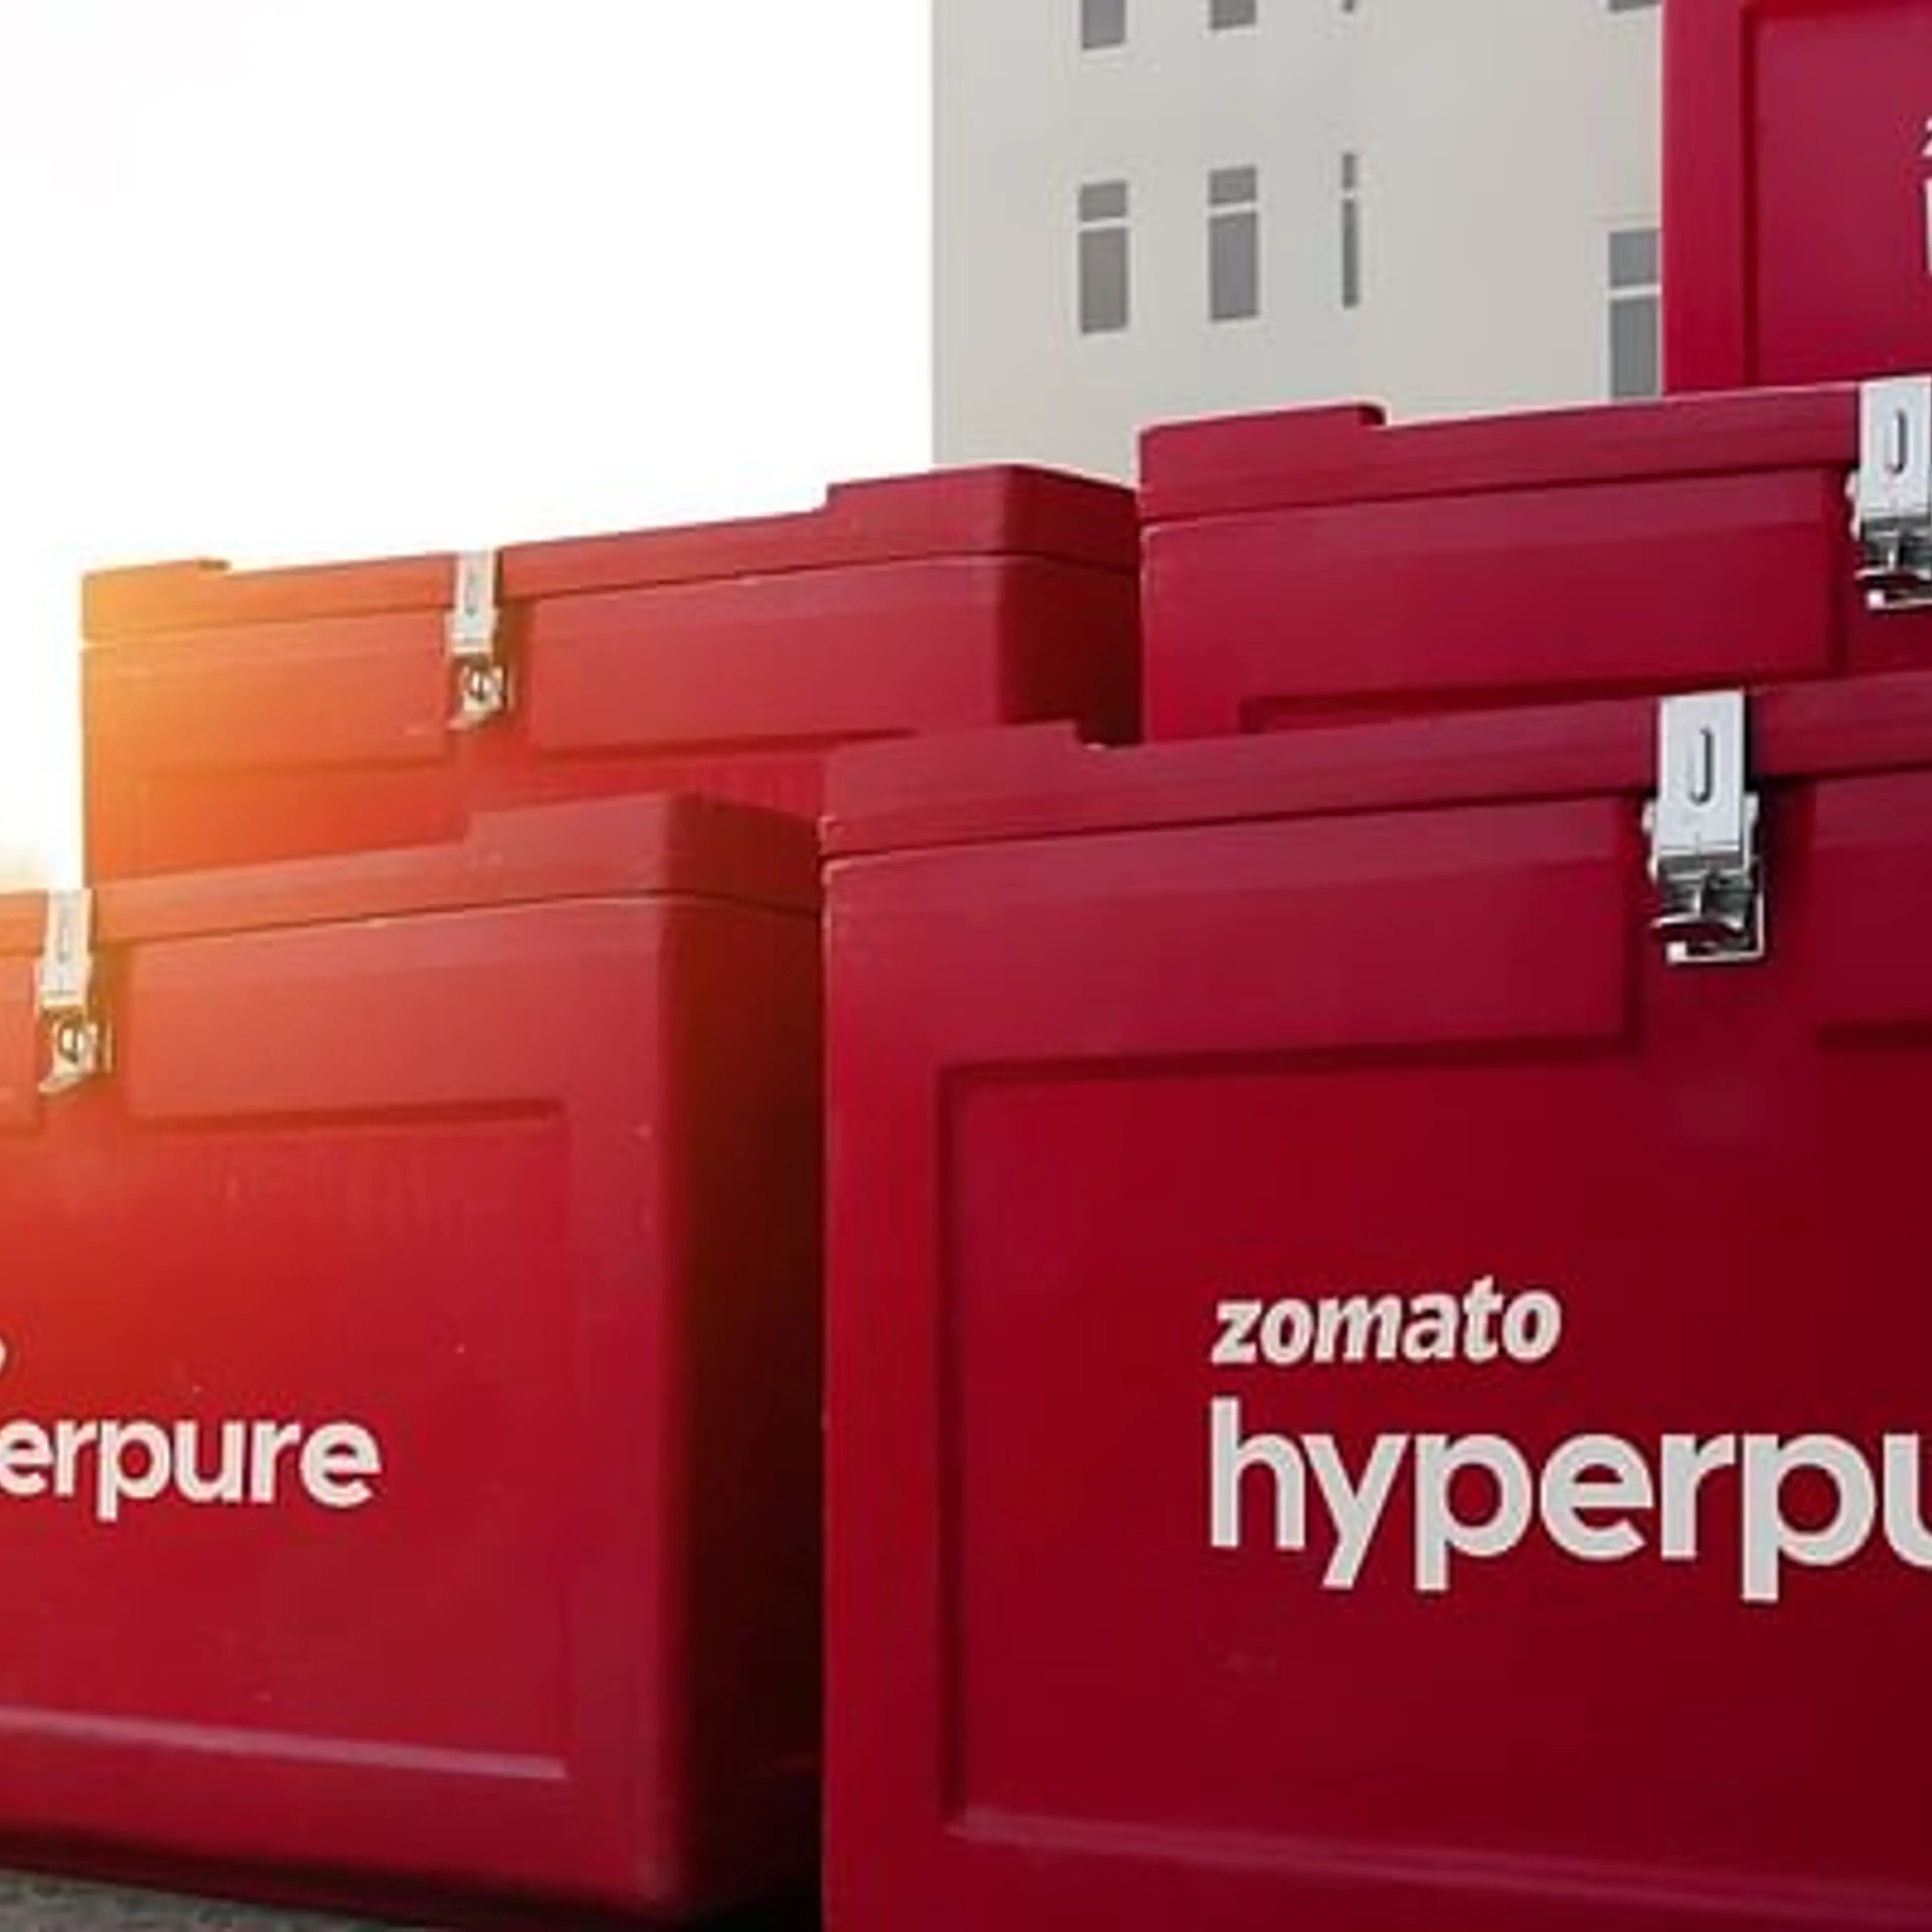 How is Zomato's Hyperpure Doubling Its Revenues Every Year?